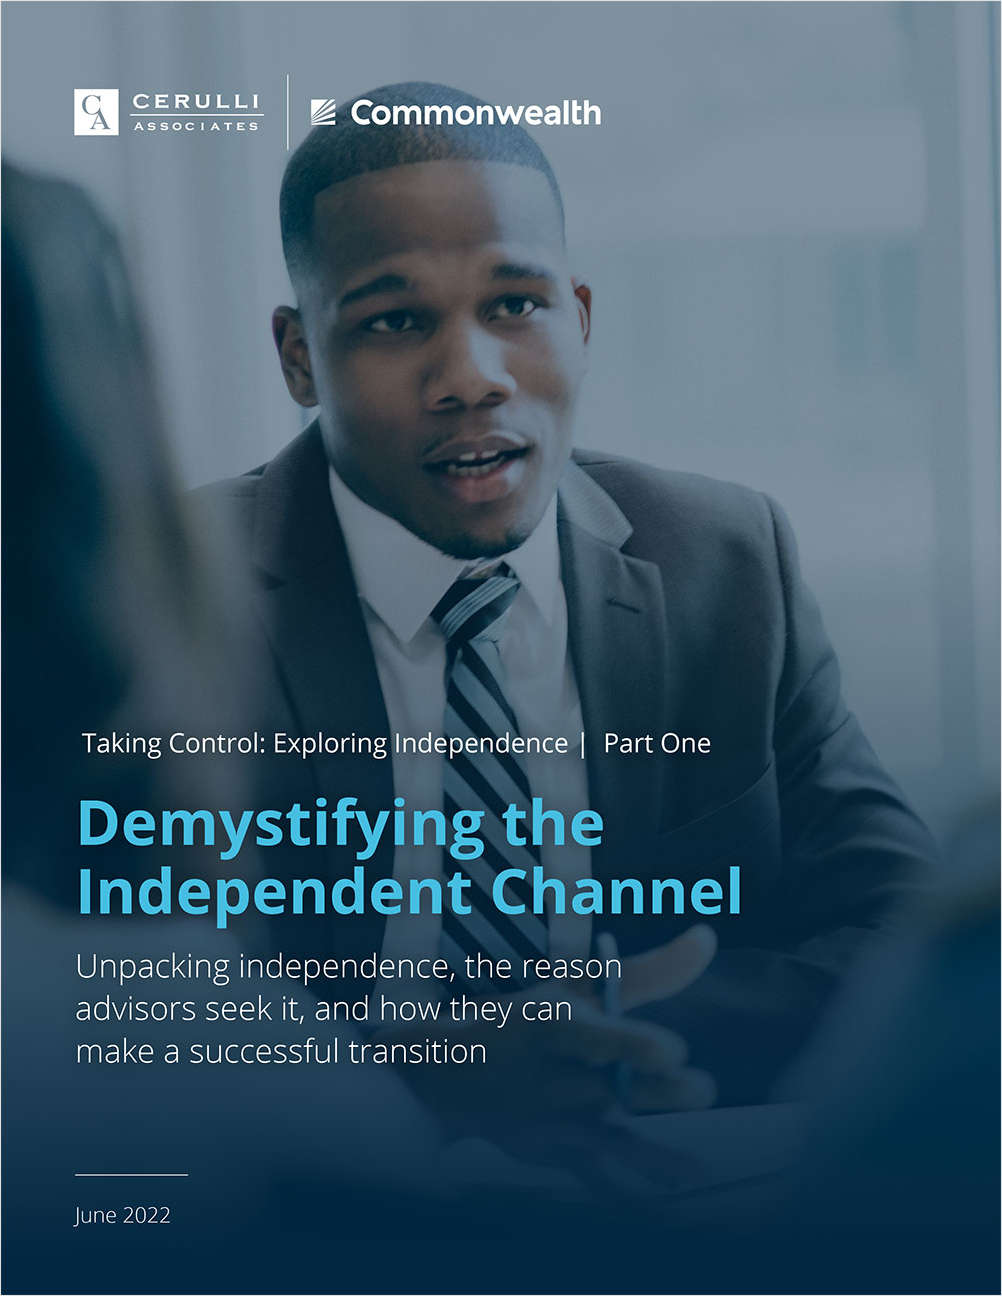 Demystifying the Independent Channel